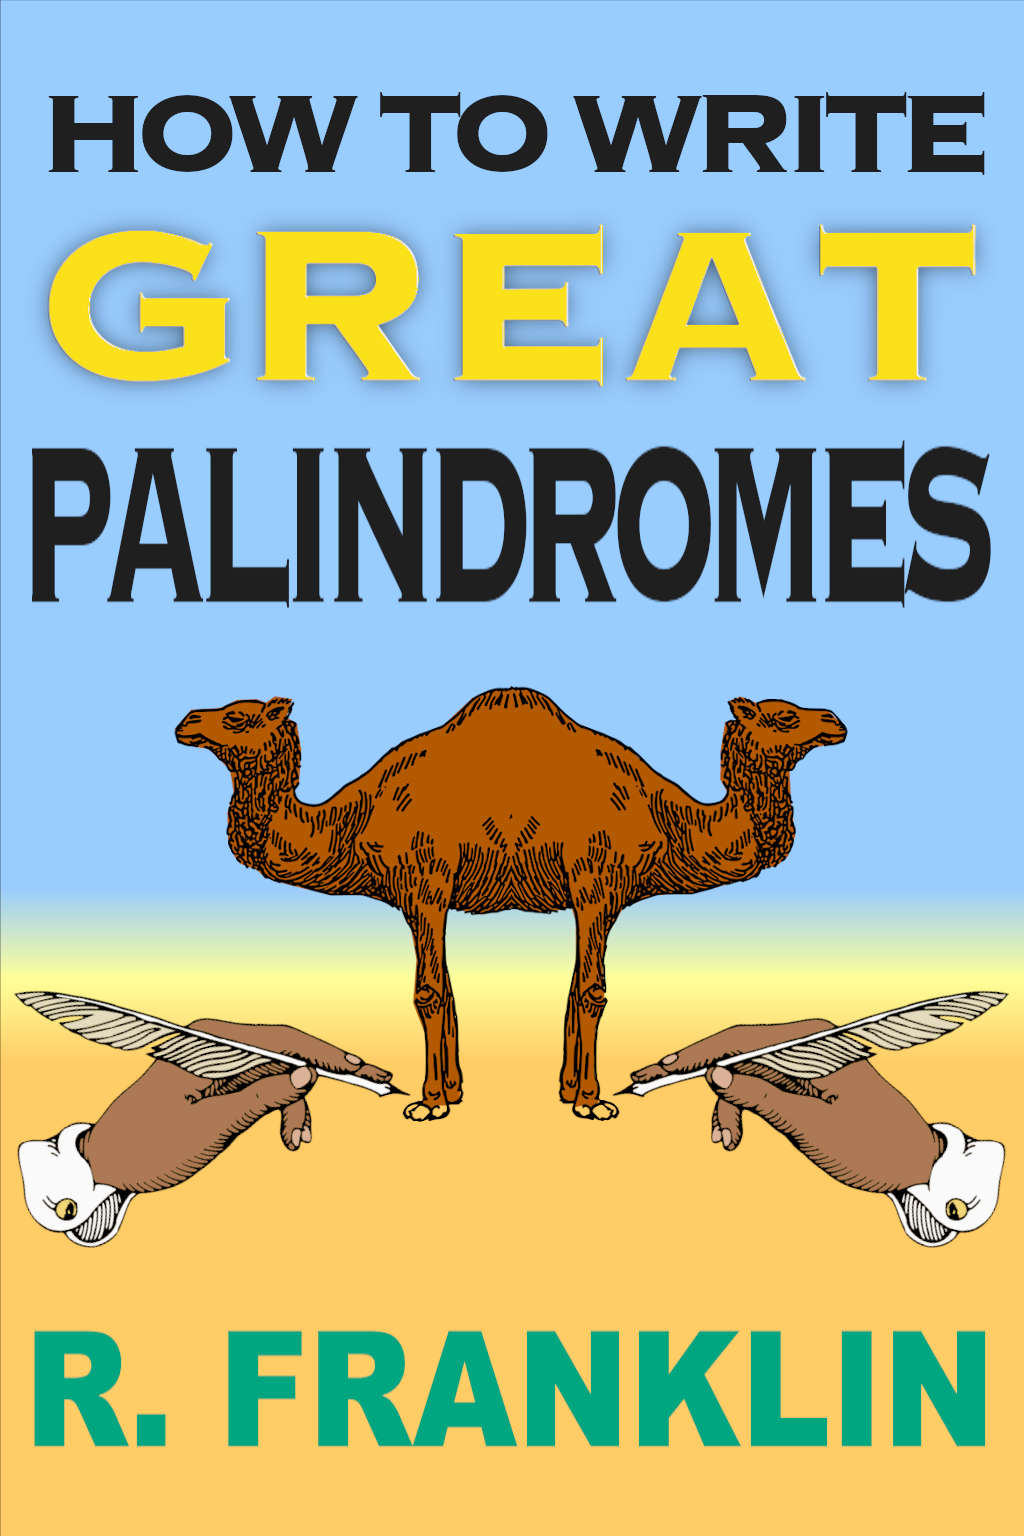 How To Write Great Palindromes